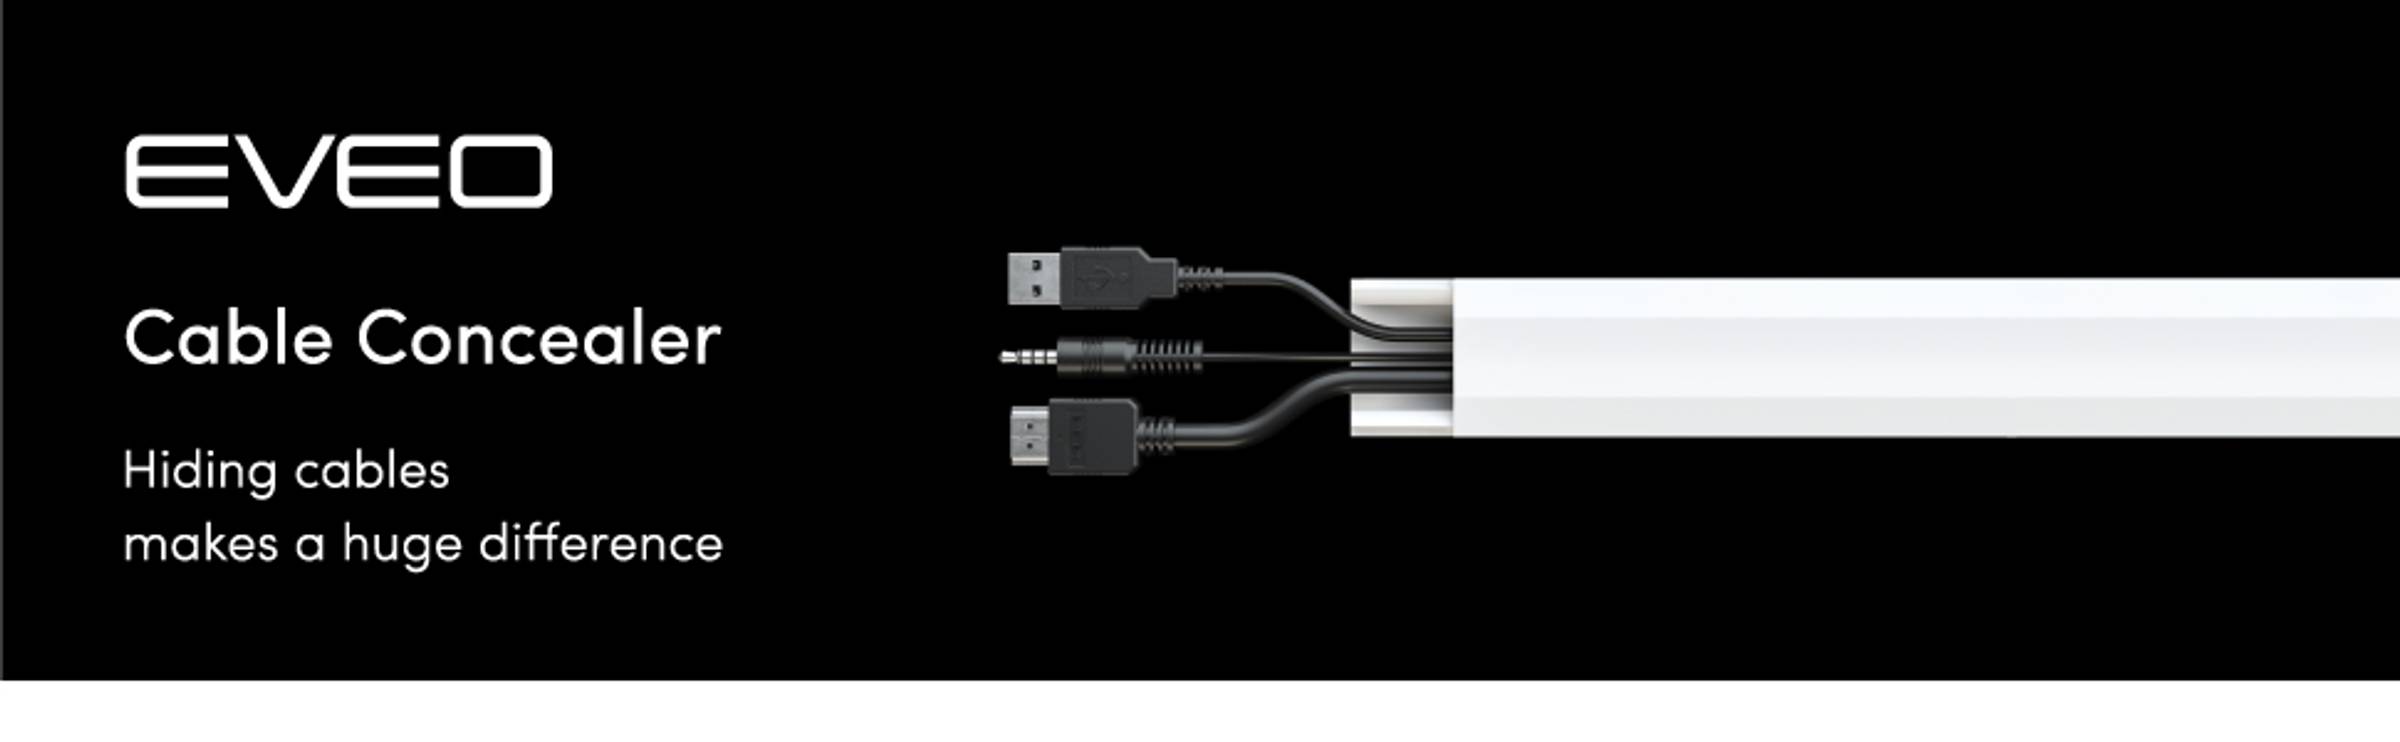 Eveo 150 Cable Concealer Cable White Matte